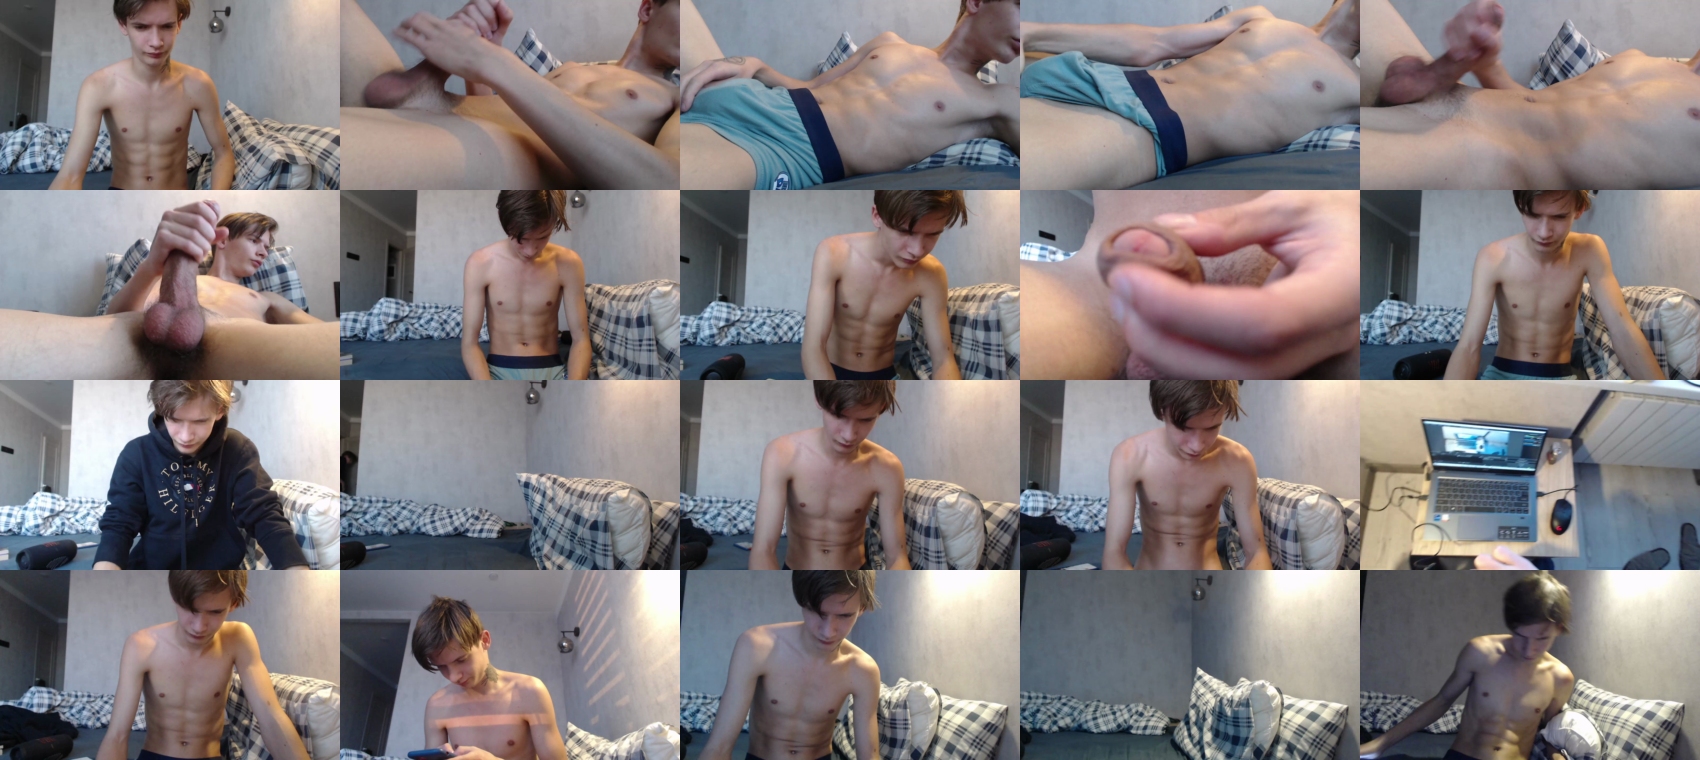 franky_twink  09-10-2022 Males hot